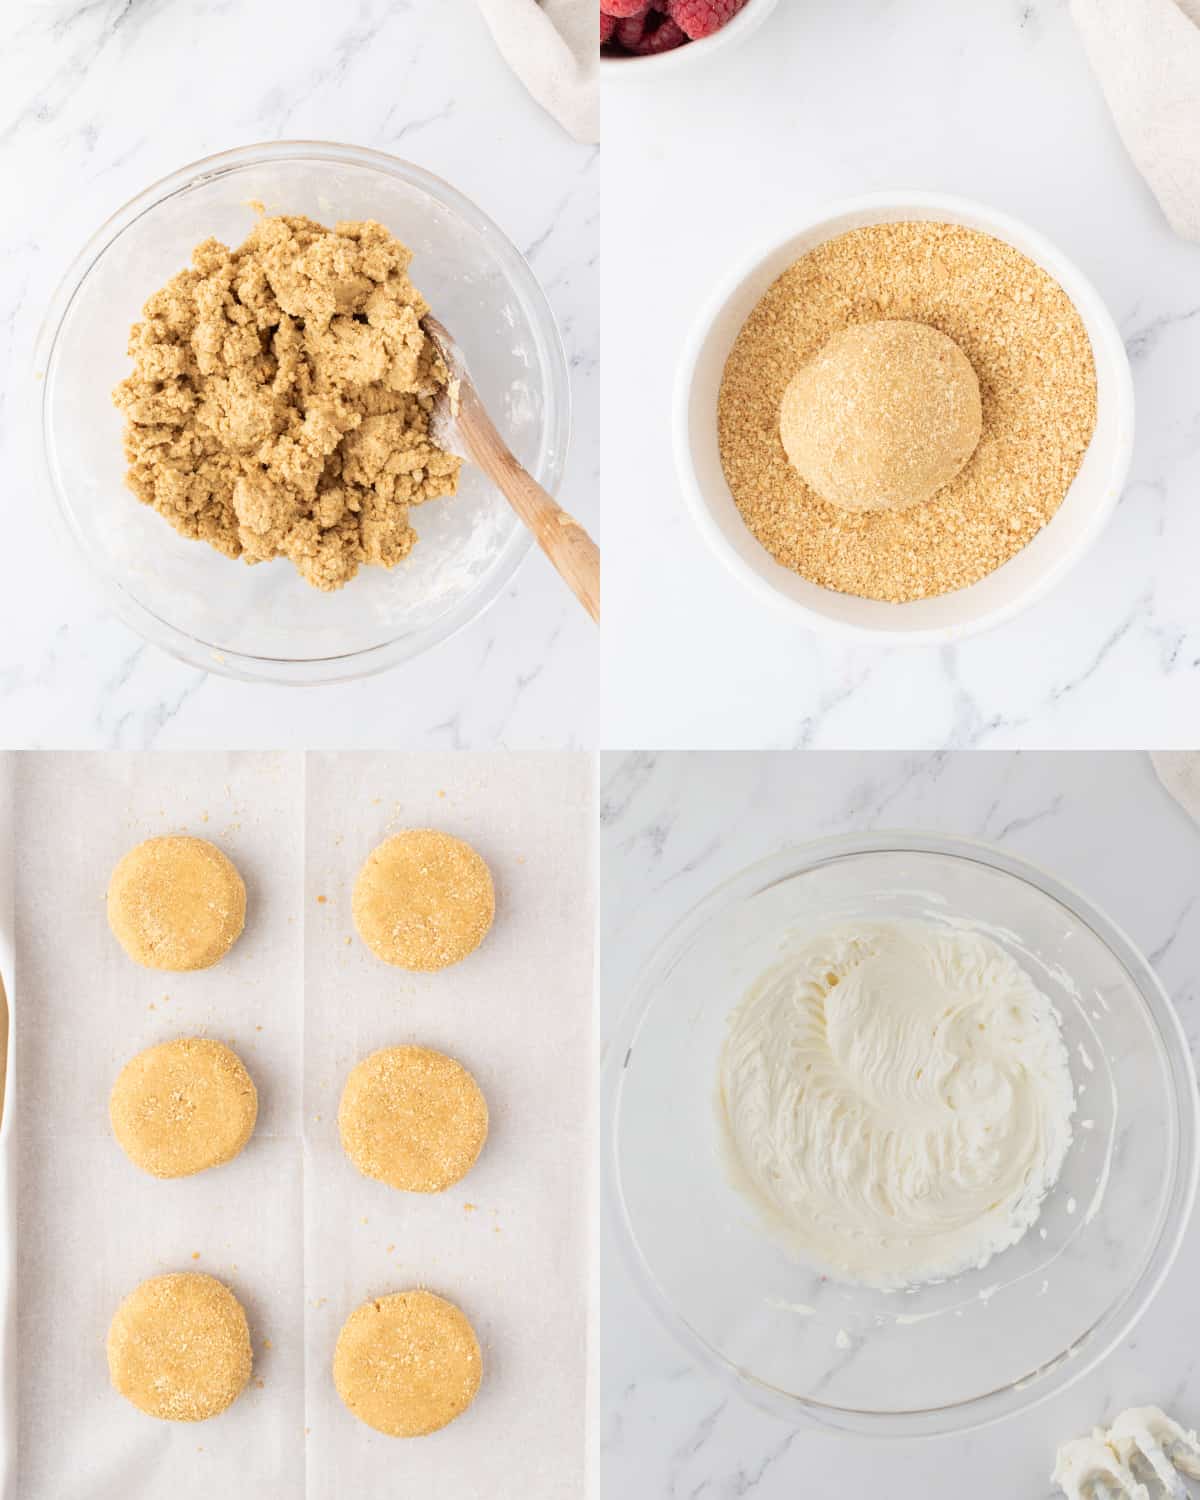 Mixing together the dough for the cookies in a bowl, then rolling each dough ball in graham cracker crumbs before placing on a baking sheet to bake in the oven.